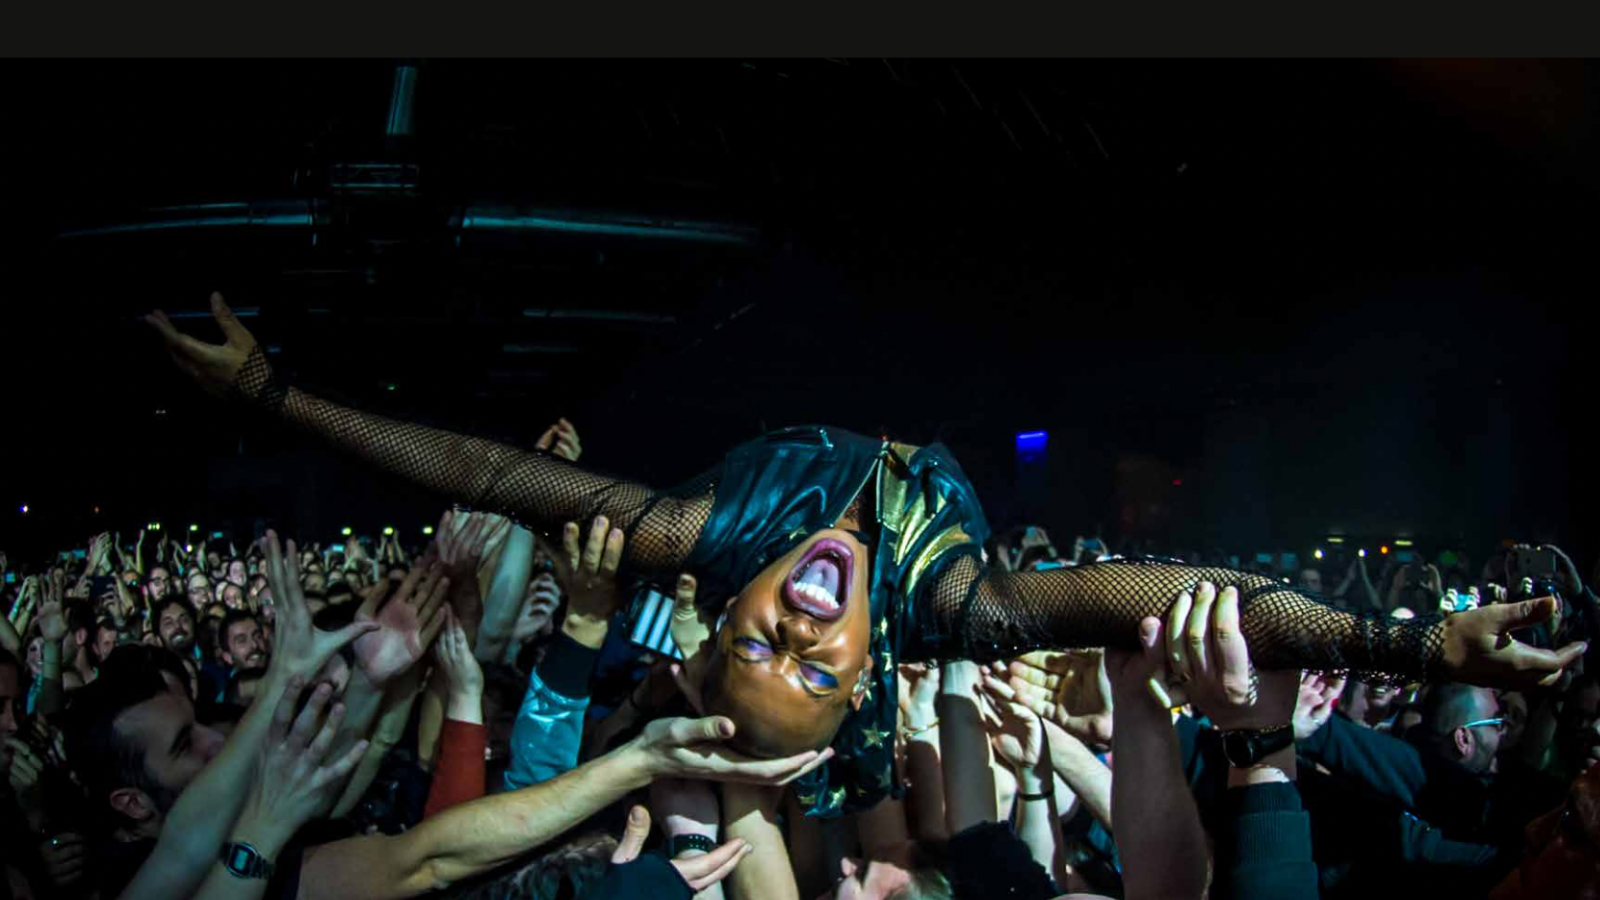 image of a political rocker Skin crowdsurfing at a show